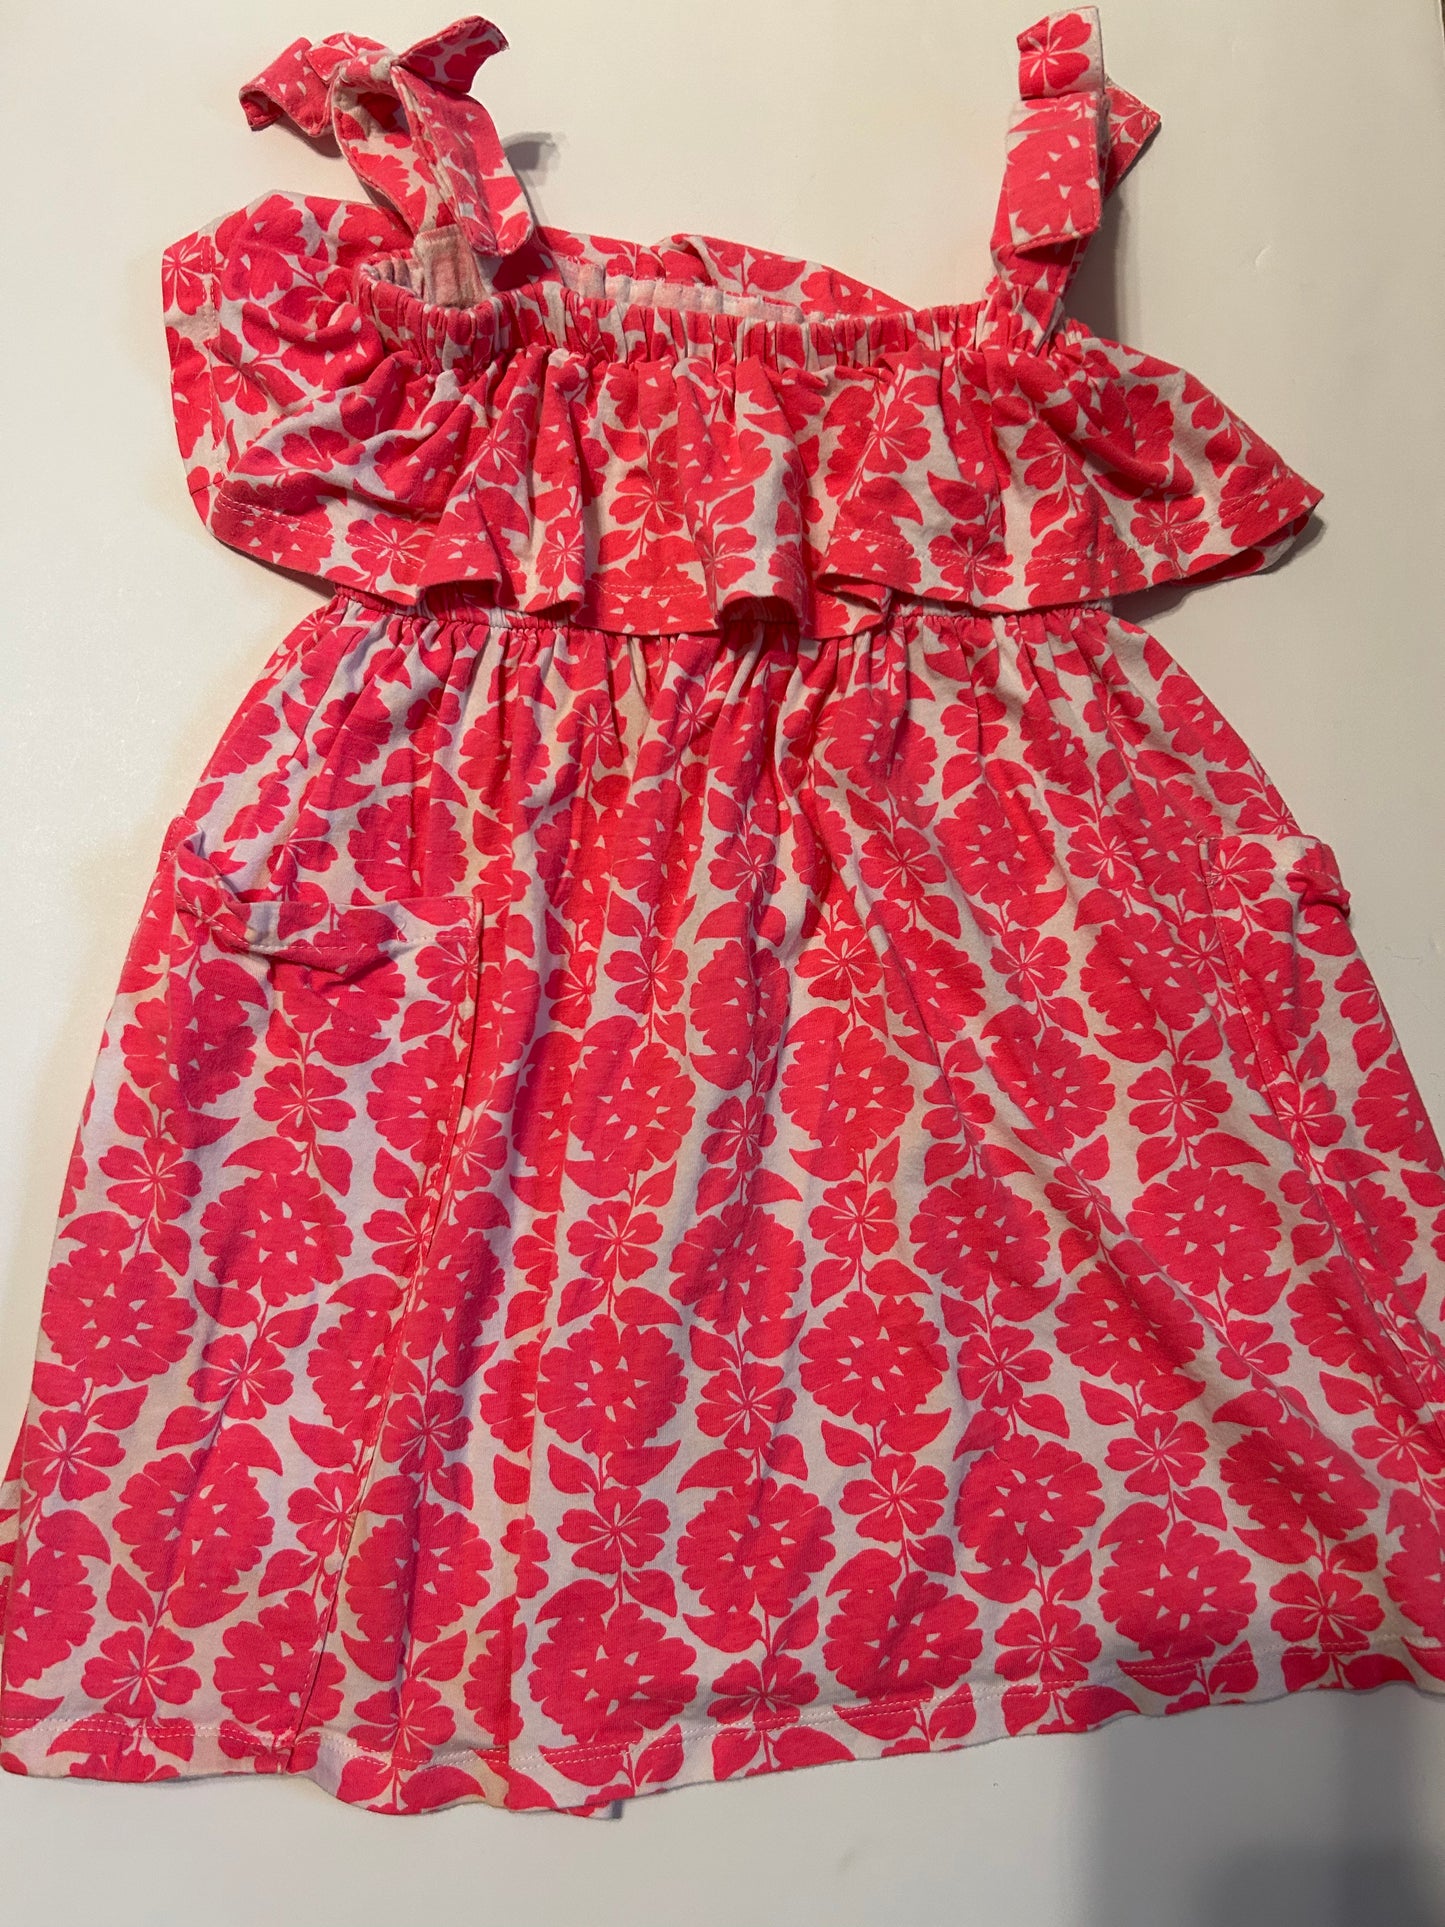 Carters 5T bright pink and white print dress 45227